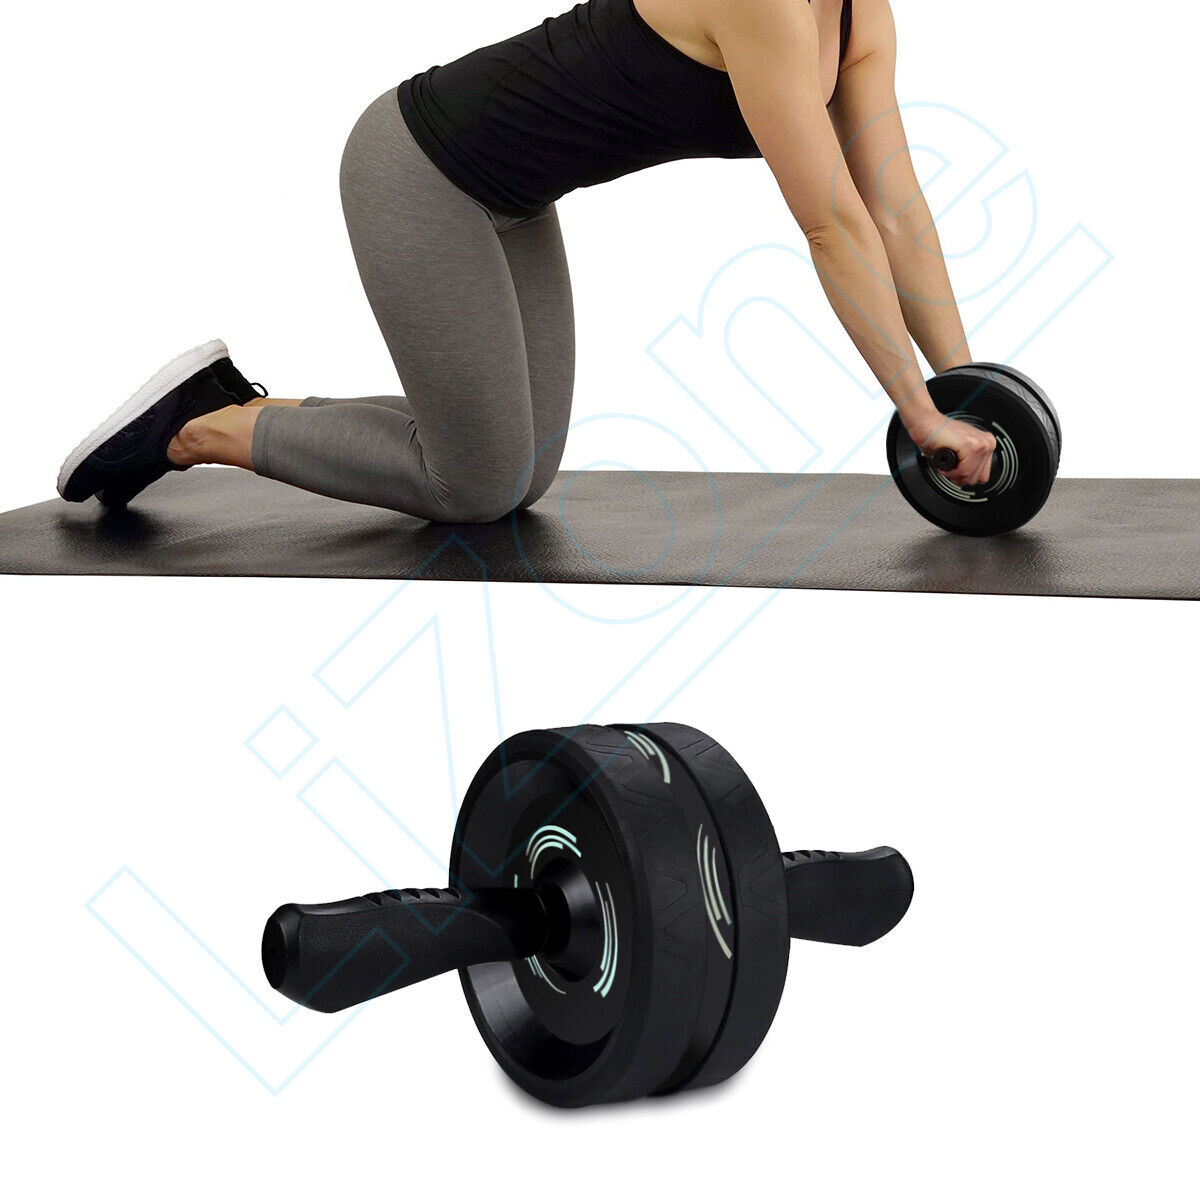 6-IN-1 Ab Roller Exercise Wheel Home Gym Workout Equipment Abdominal Fitness Lizone Does Not Apply - фотография #3